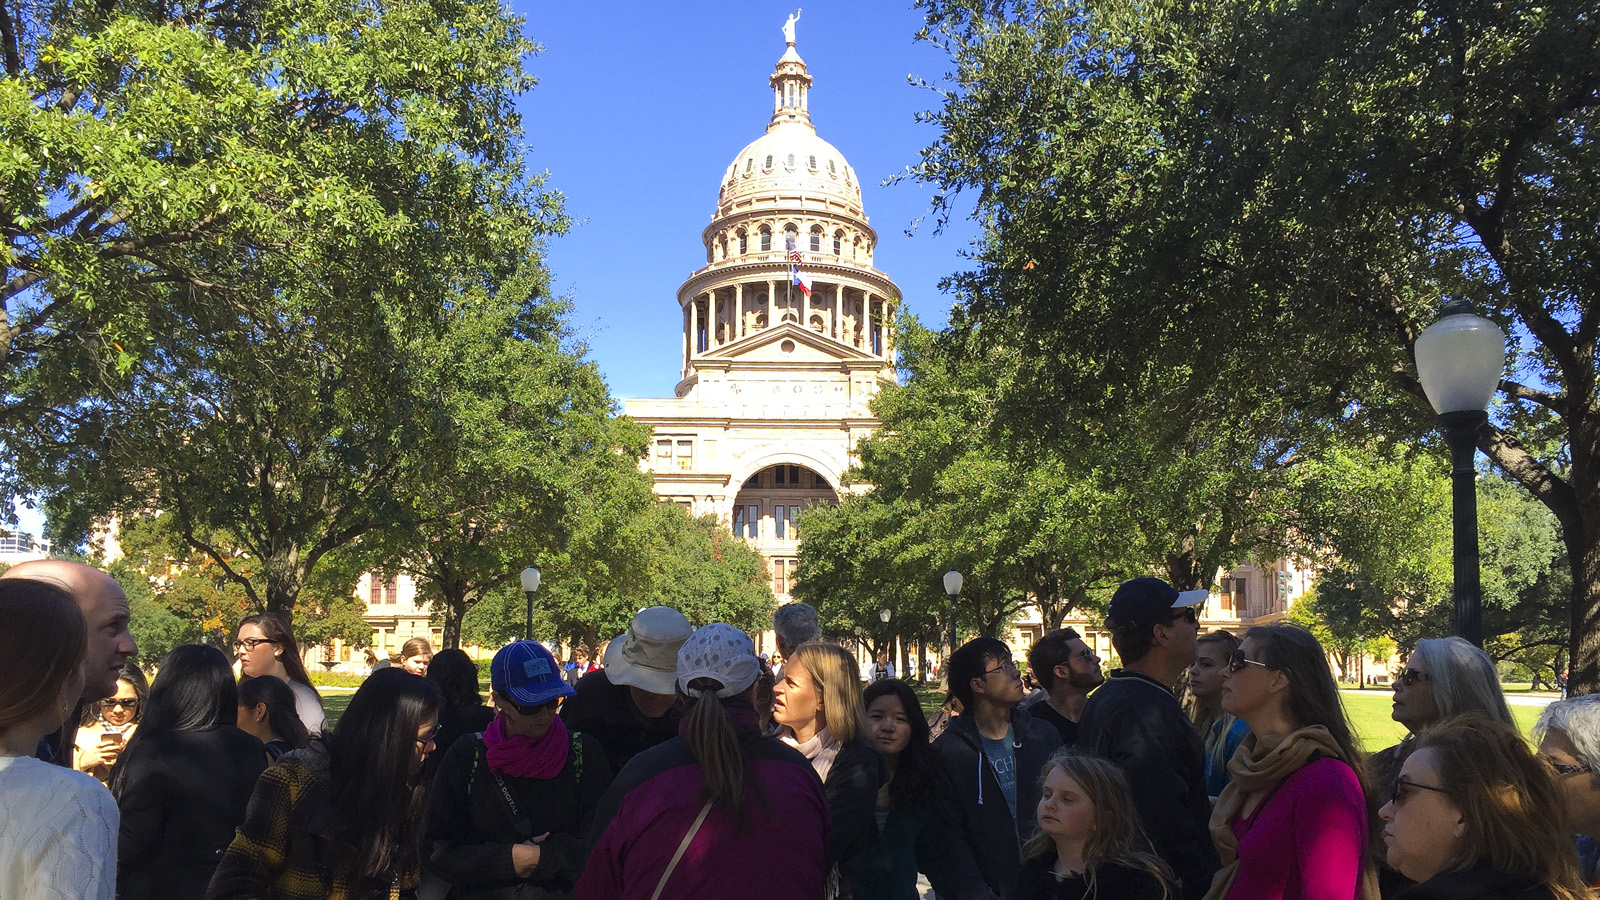 WOTW_Austin_TXCapitol-GovernorsMansion_VirginiaBoswell_2015.jpg